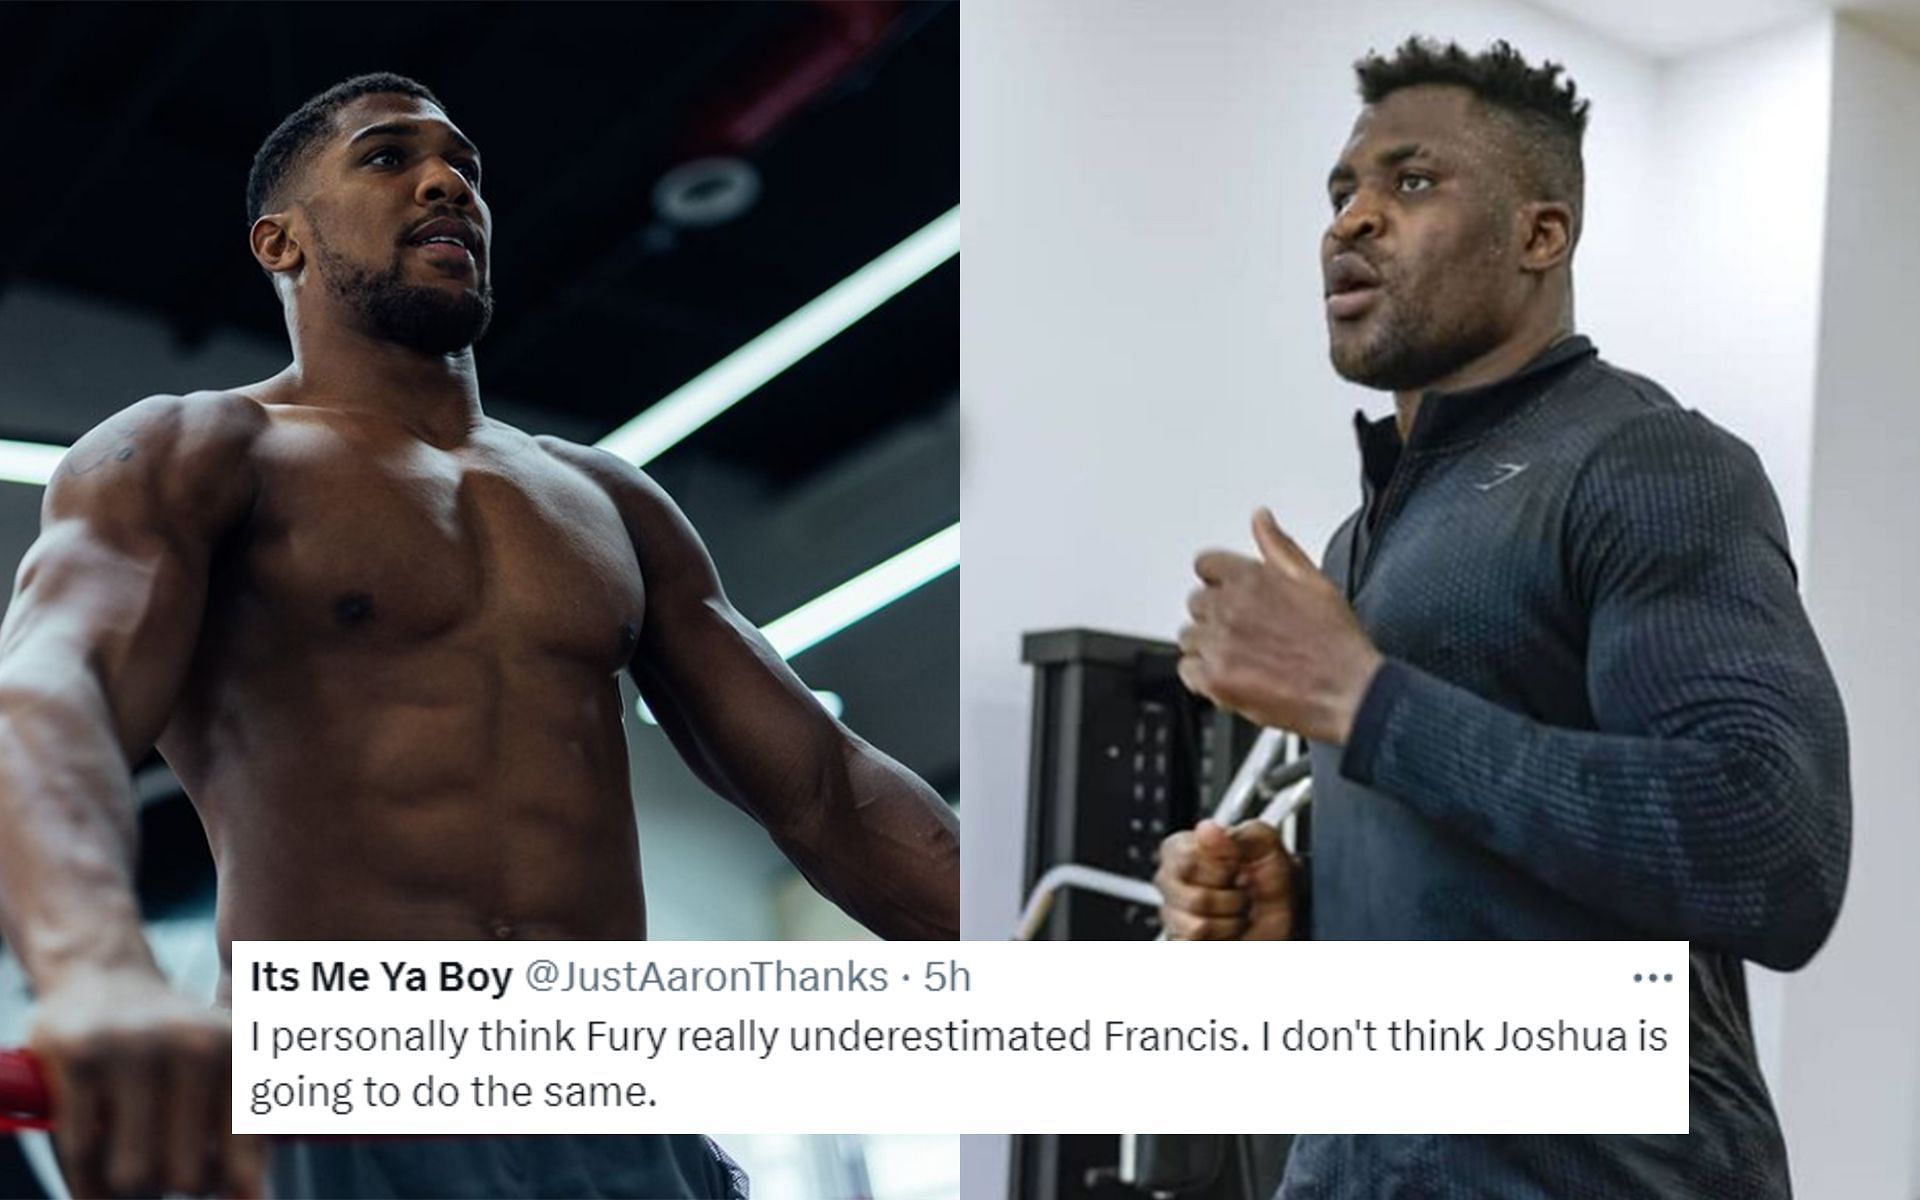 Anthony Joshua (left) opens as a betting favorite over Francis Ngannou (right) (Images Courtesy: @anthonyjoshua and @francisngannou Instagram)